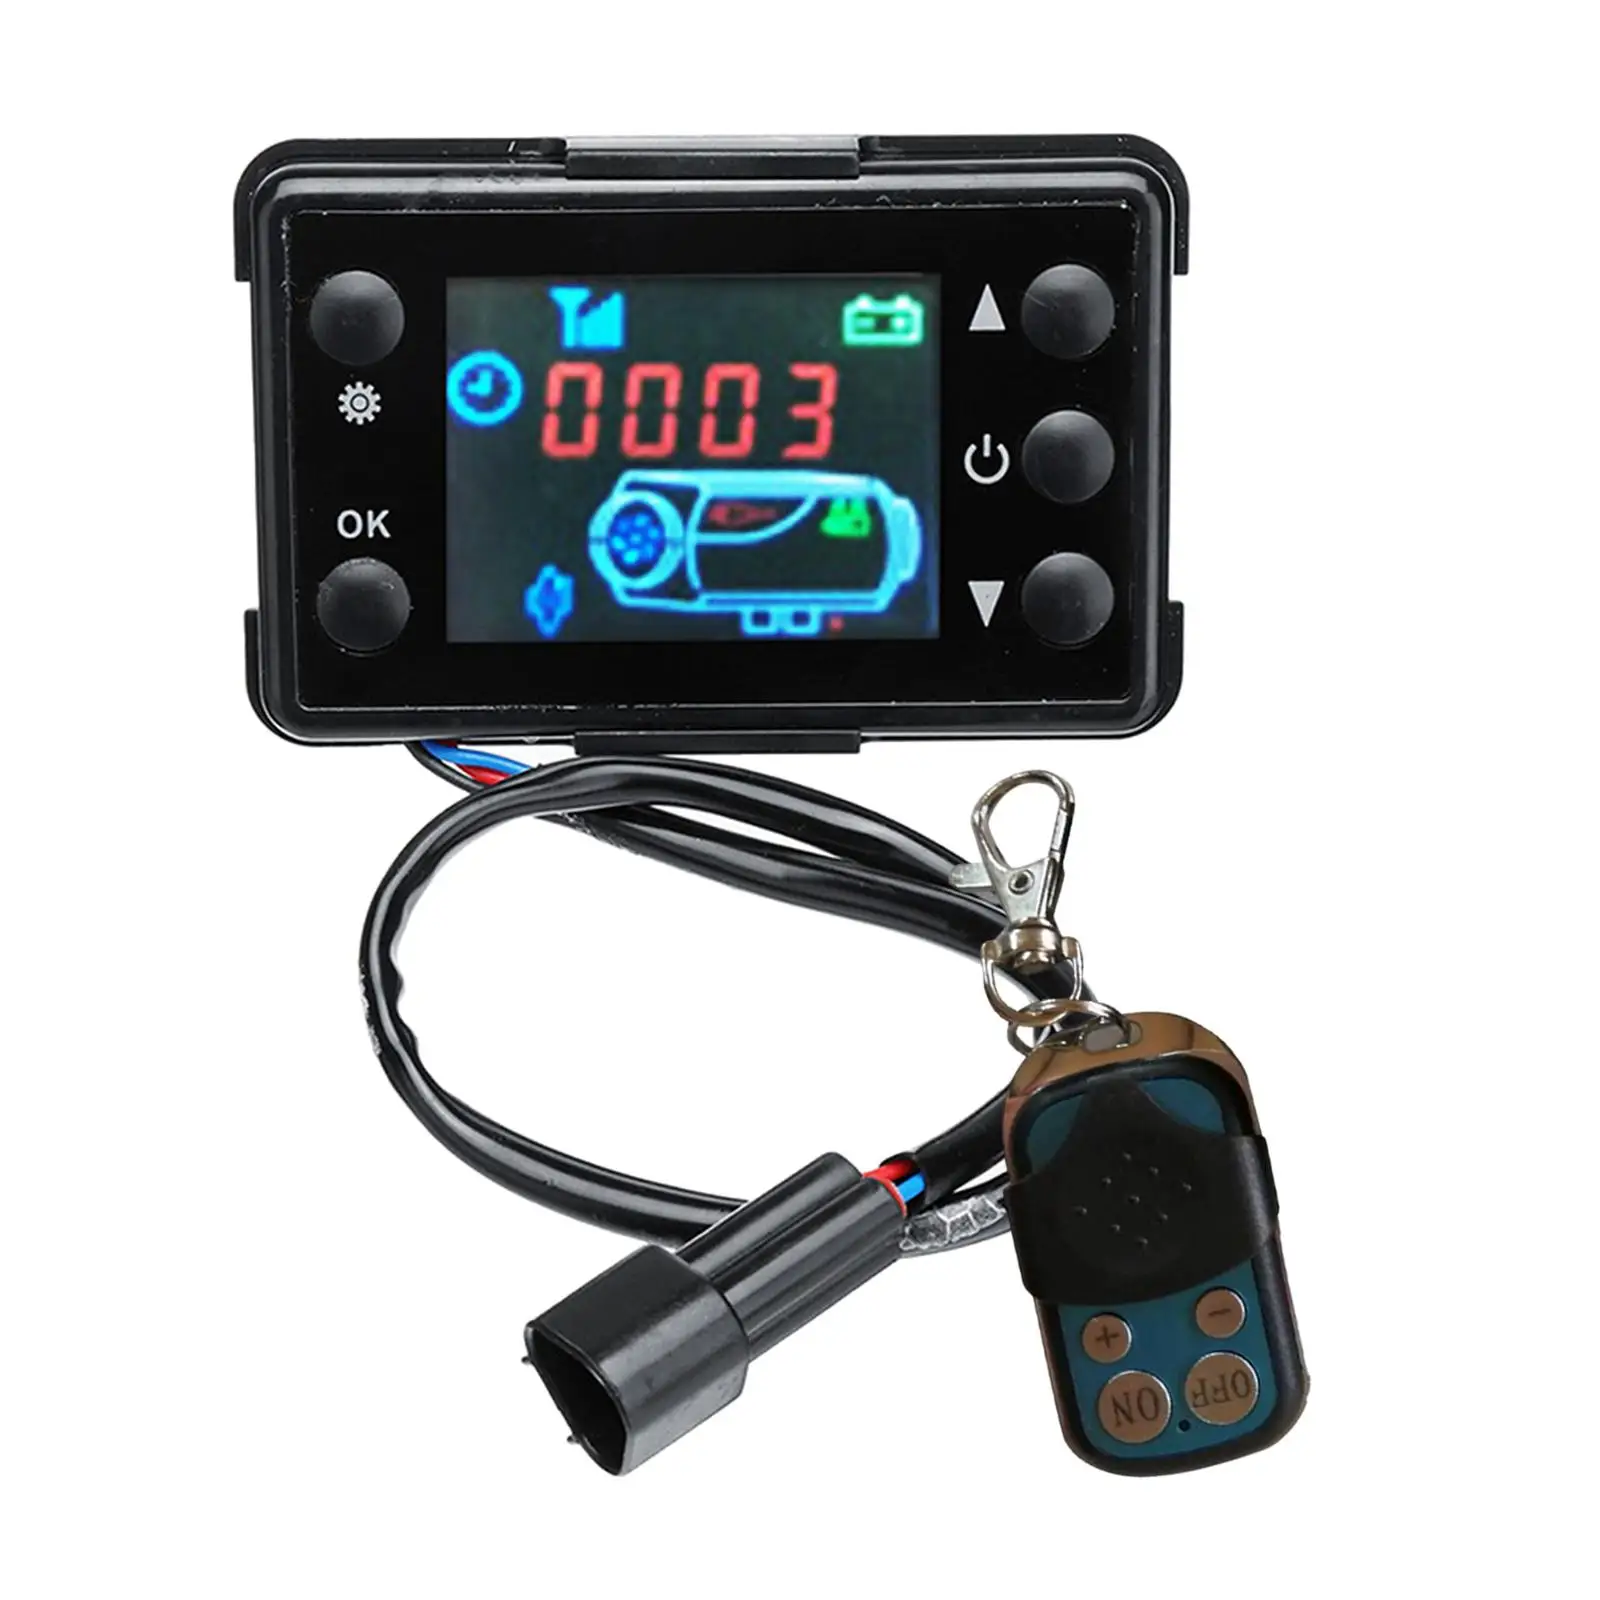 LCD Monitor Switch Parking Heater Control 12/24V for Vehicles Truck Car